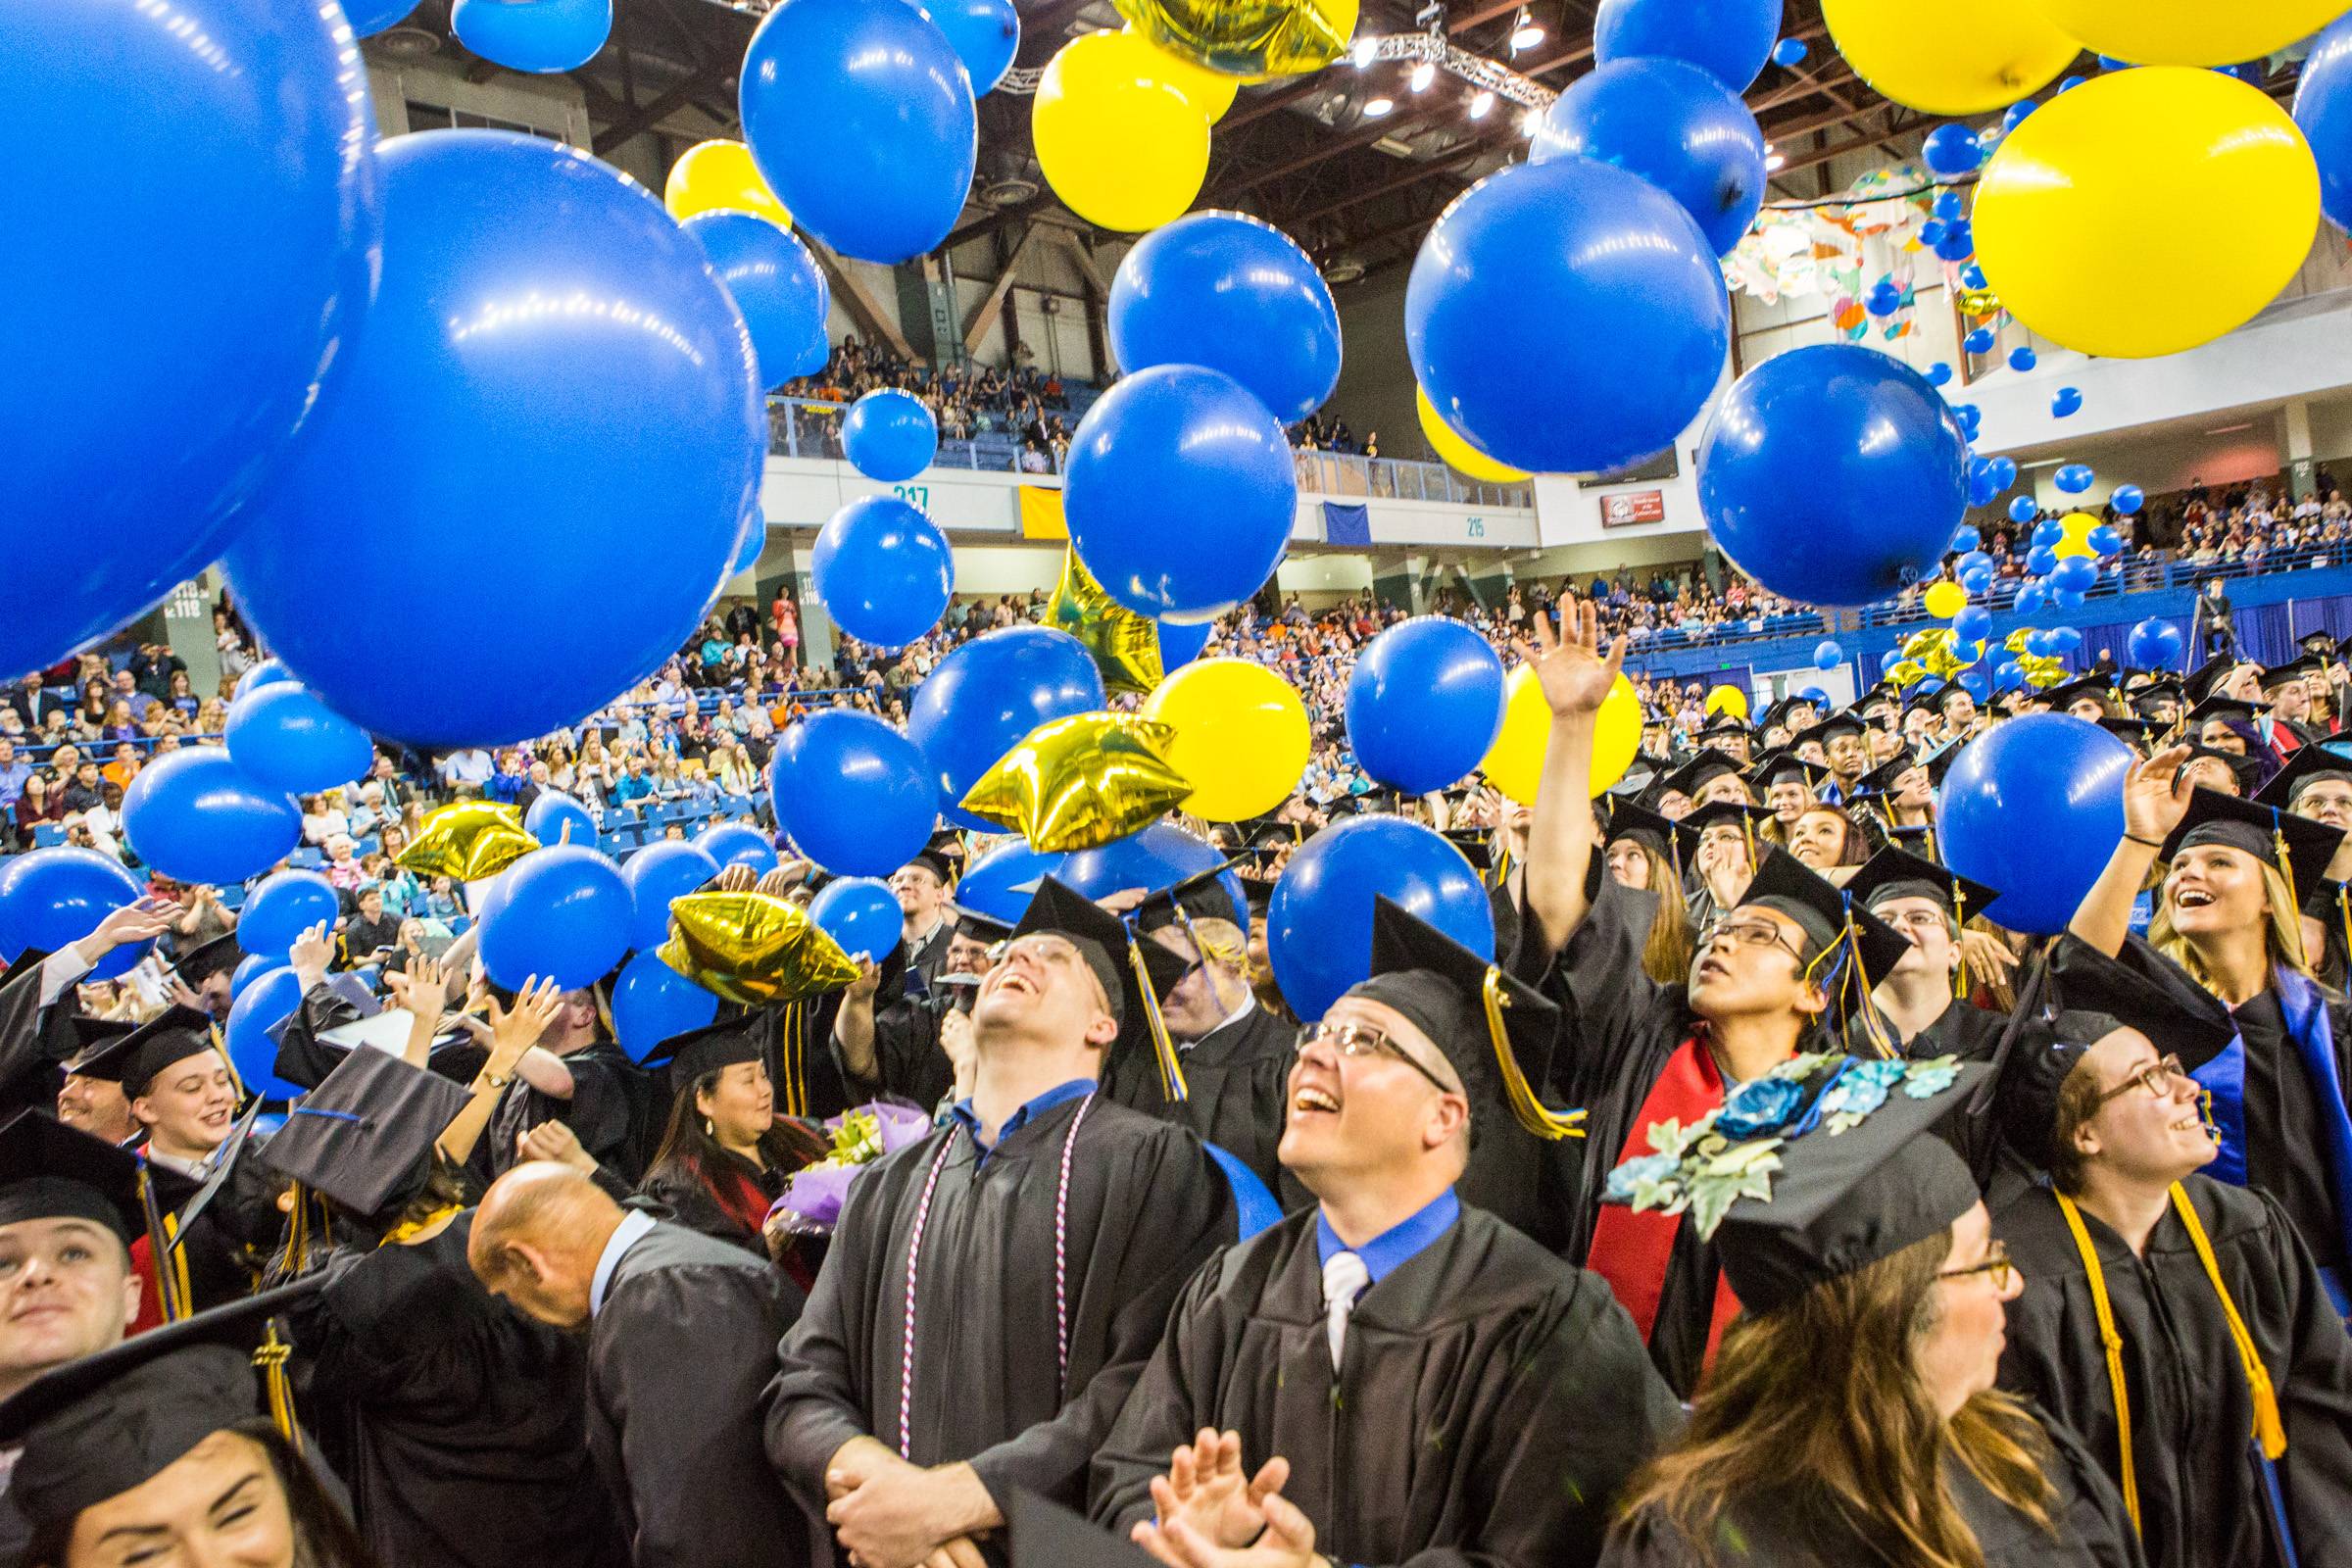 Balloon drop at UAF commencement ceremony